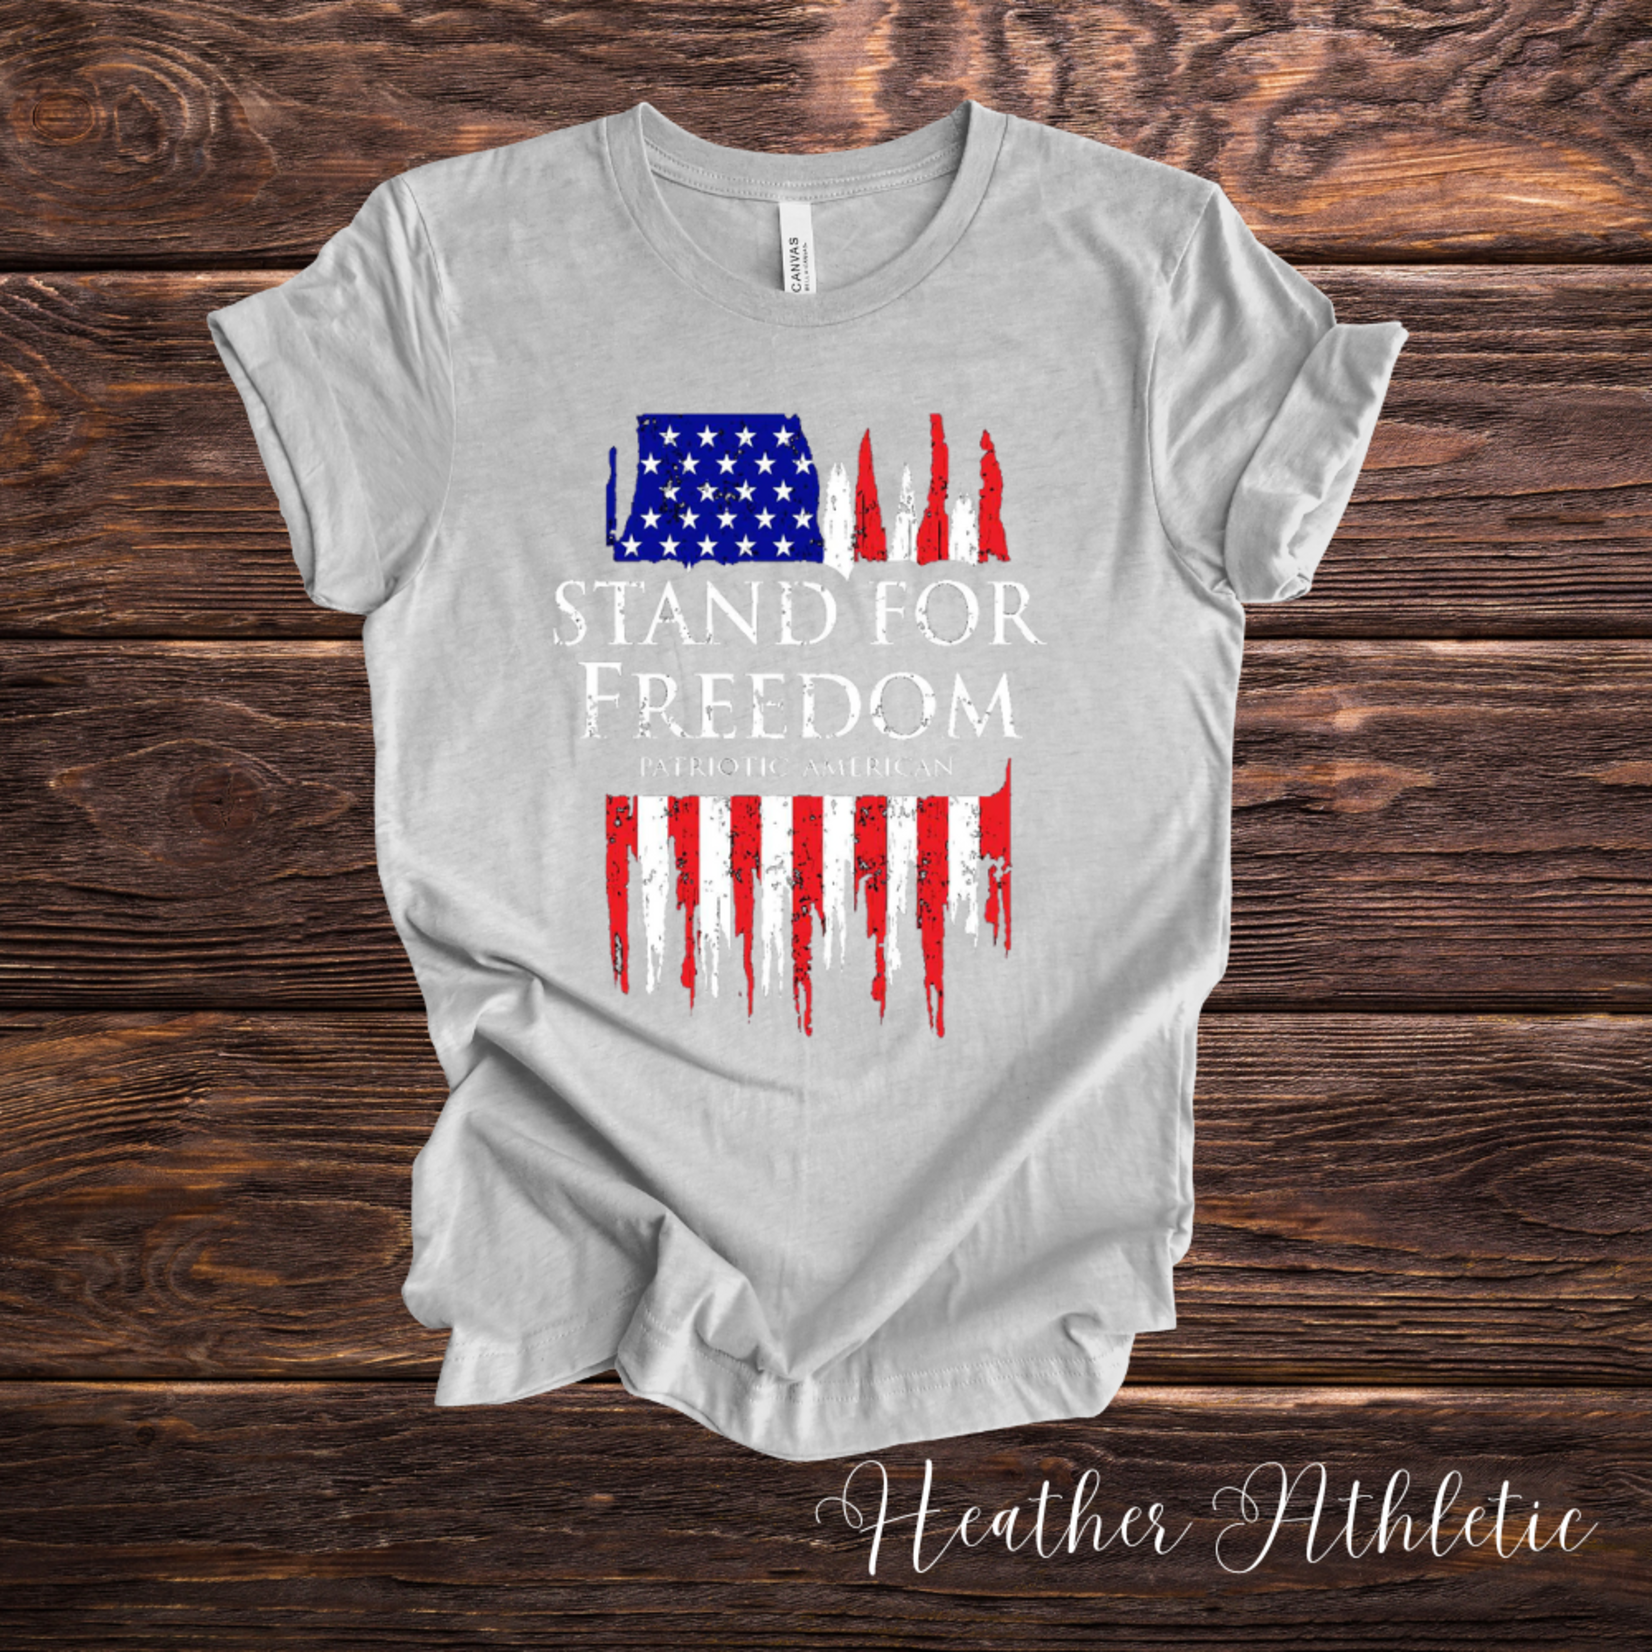 Stand For Freedom - Short Sleeve Tee